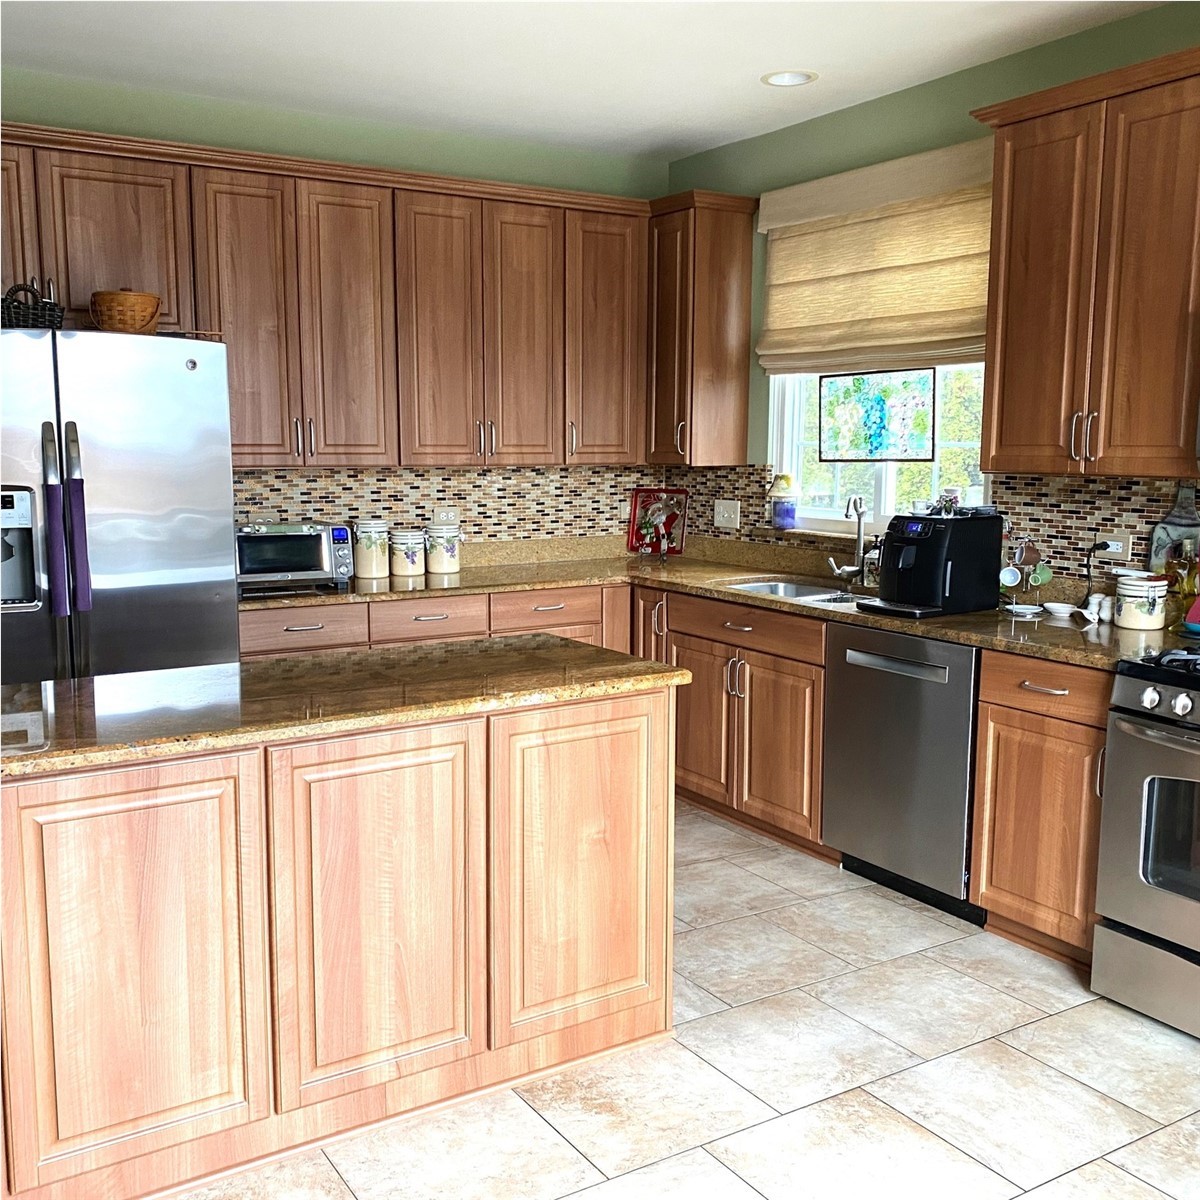 Refresh Your Kitchen This Spring with Cabinet Refacing!